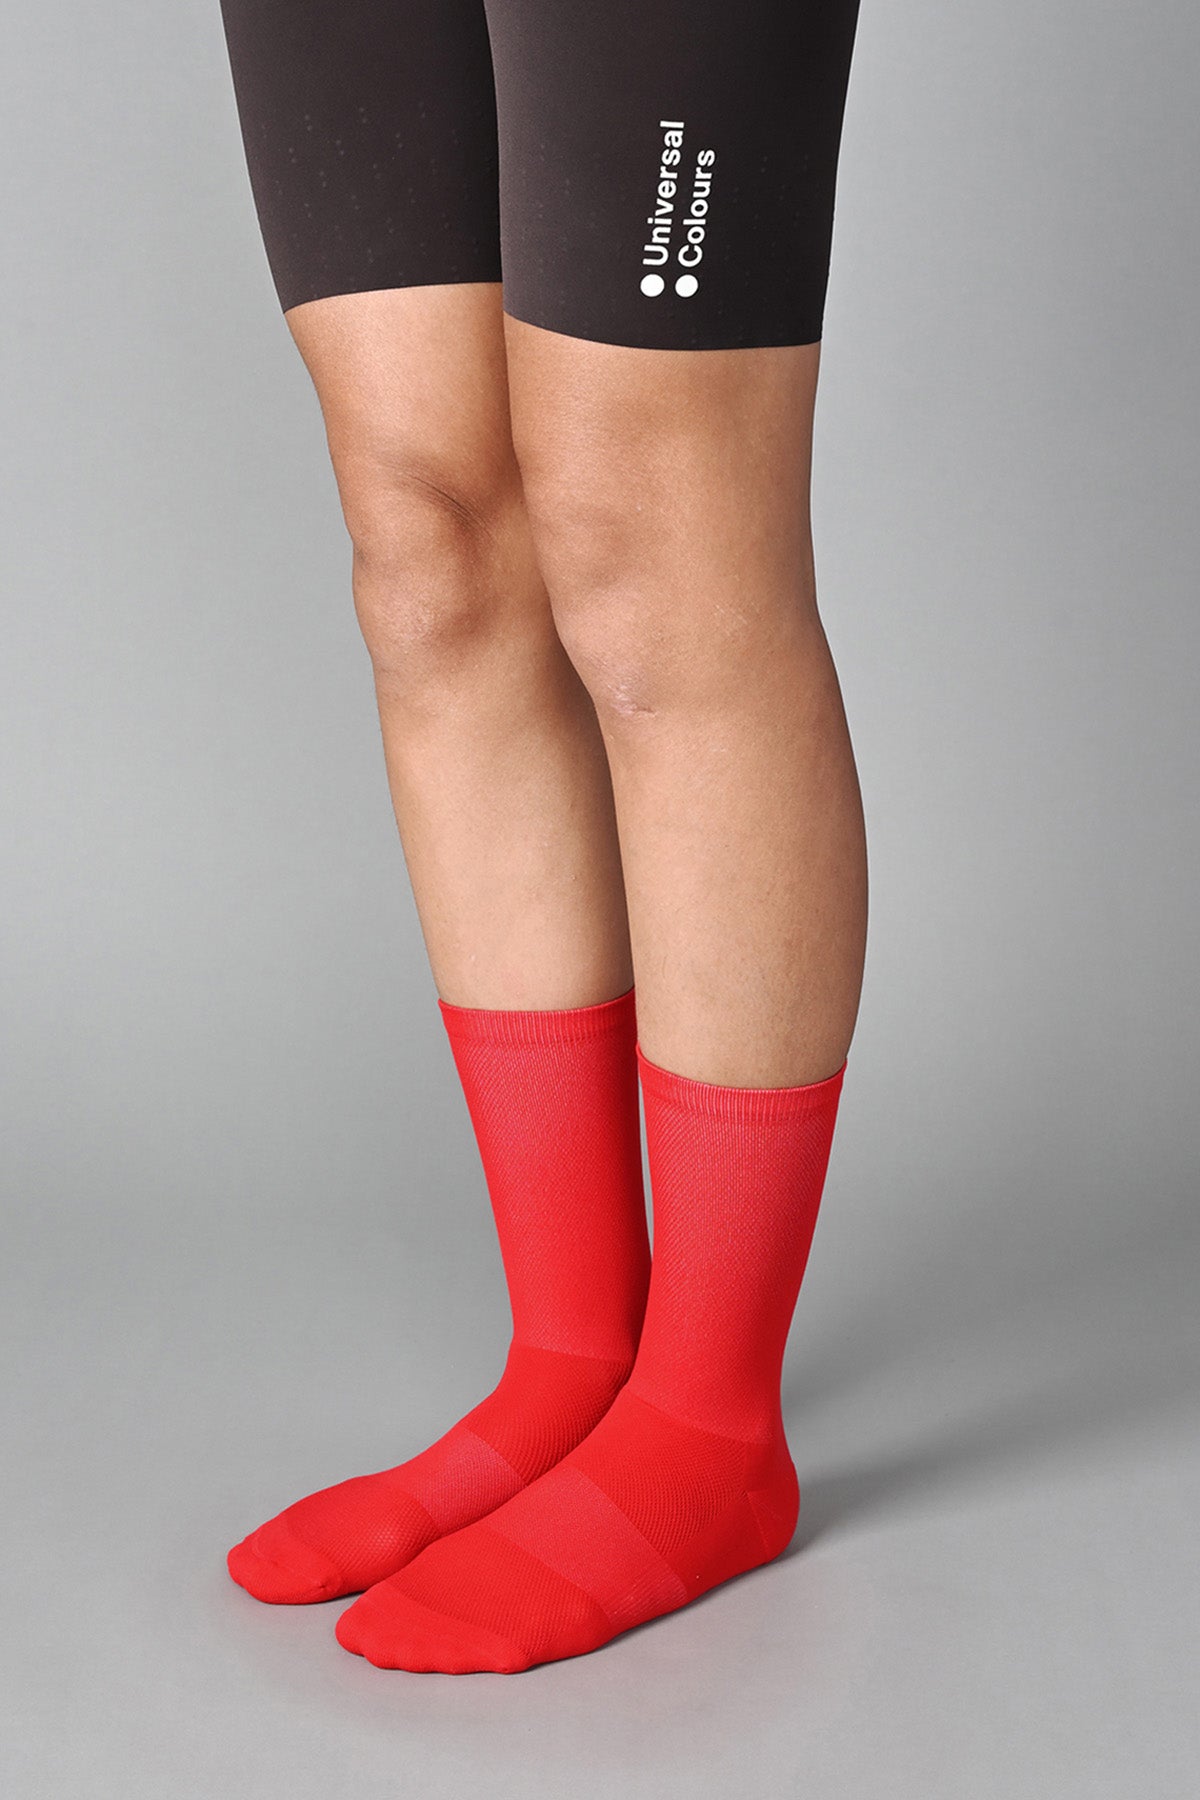 STEALTH - CANDY APPLE RED FRONT SIDE | BEST CYCLING SOCKS